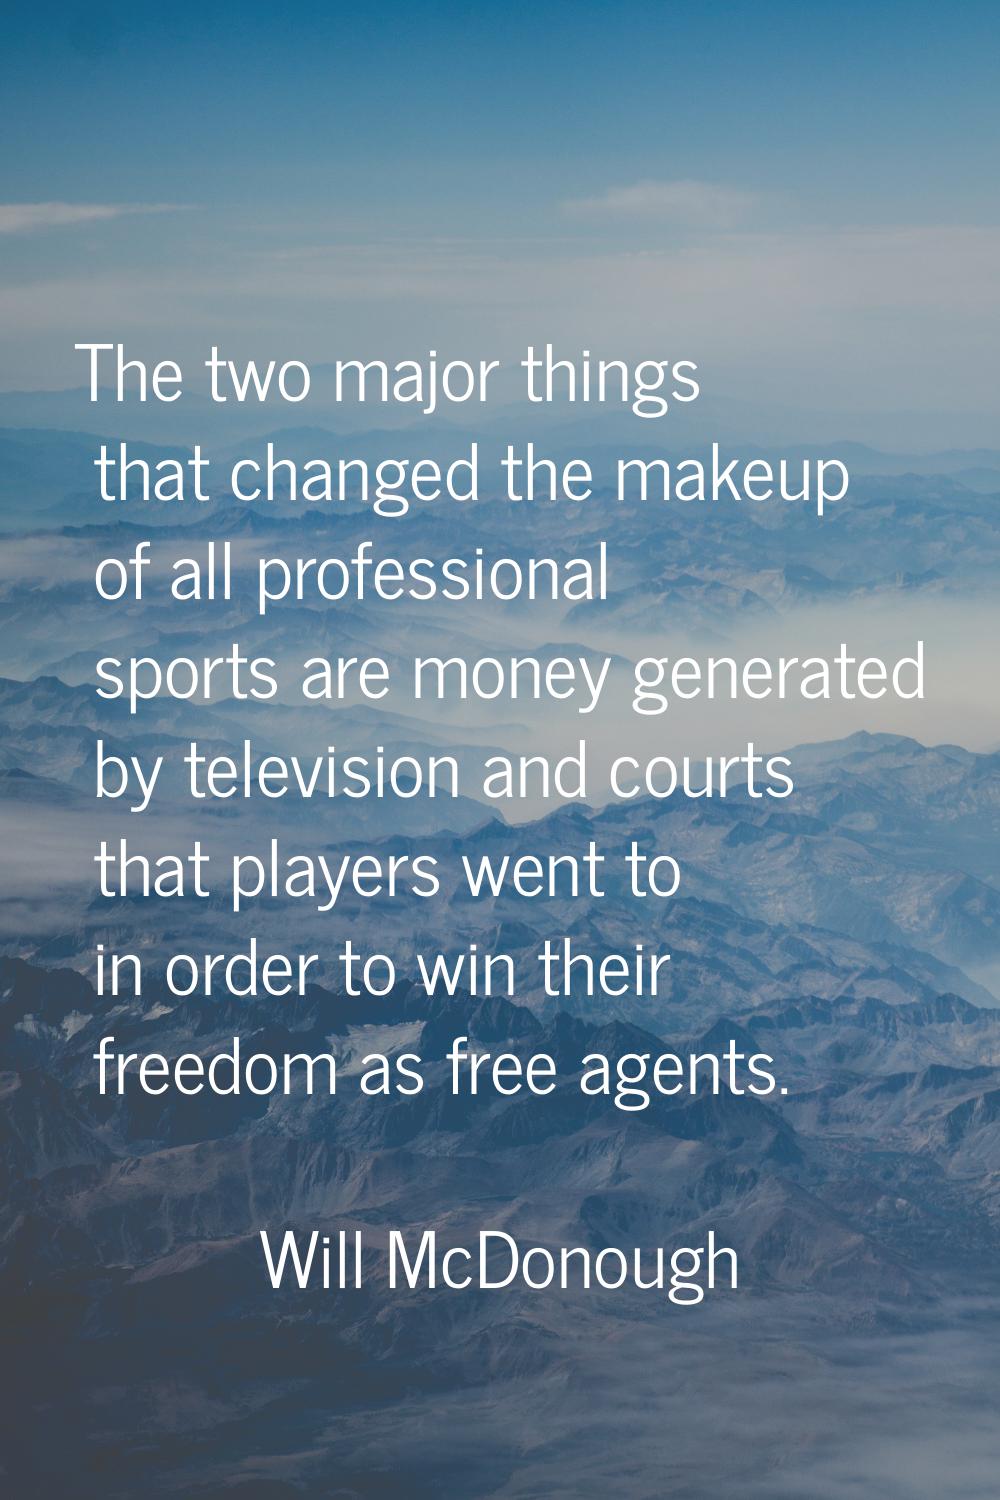 The two major things that changed the makeup of all professional sports are money generated by tele